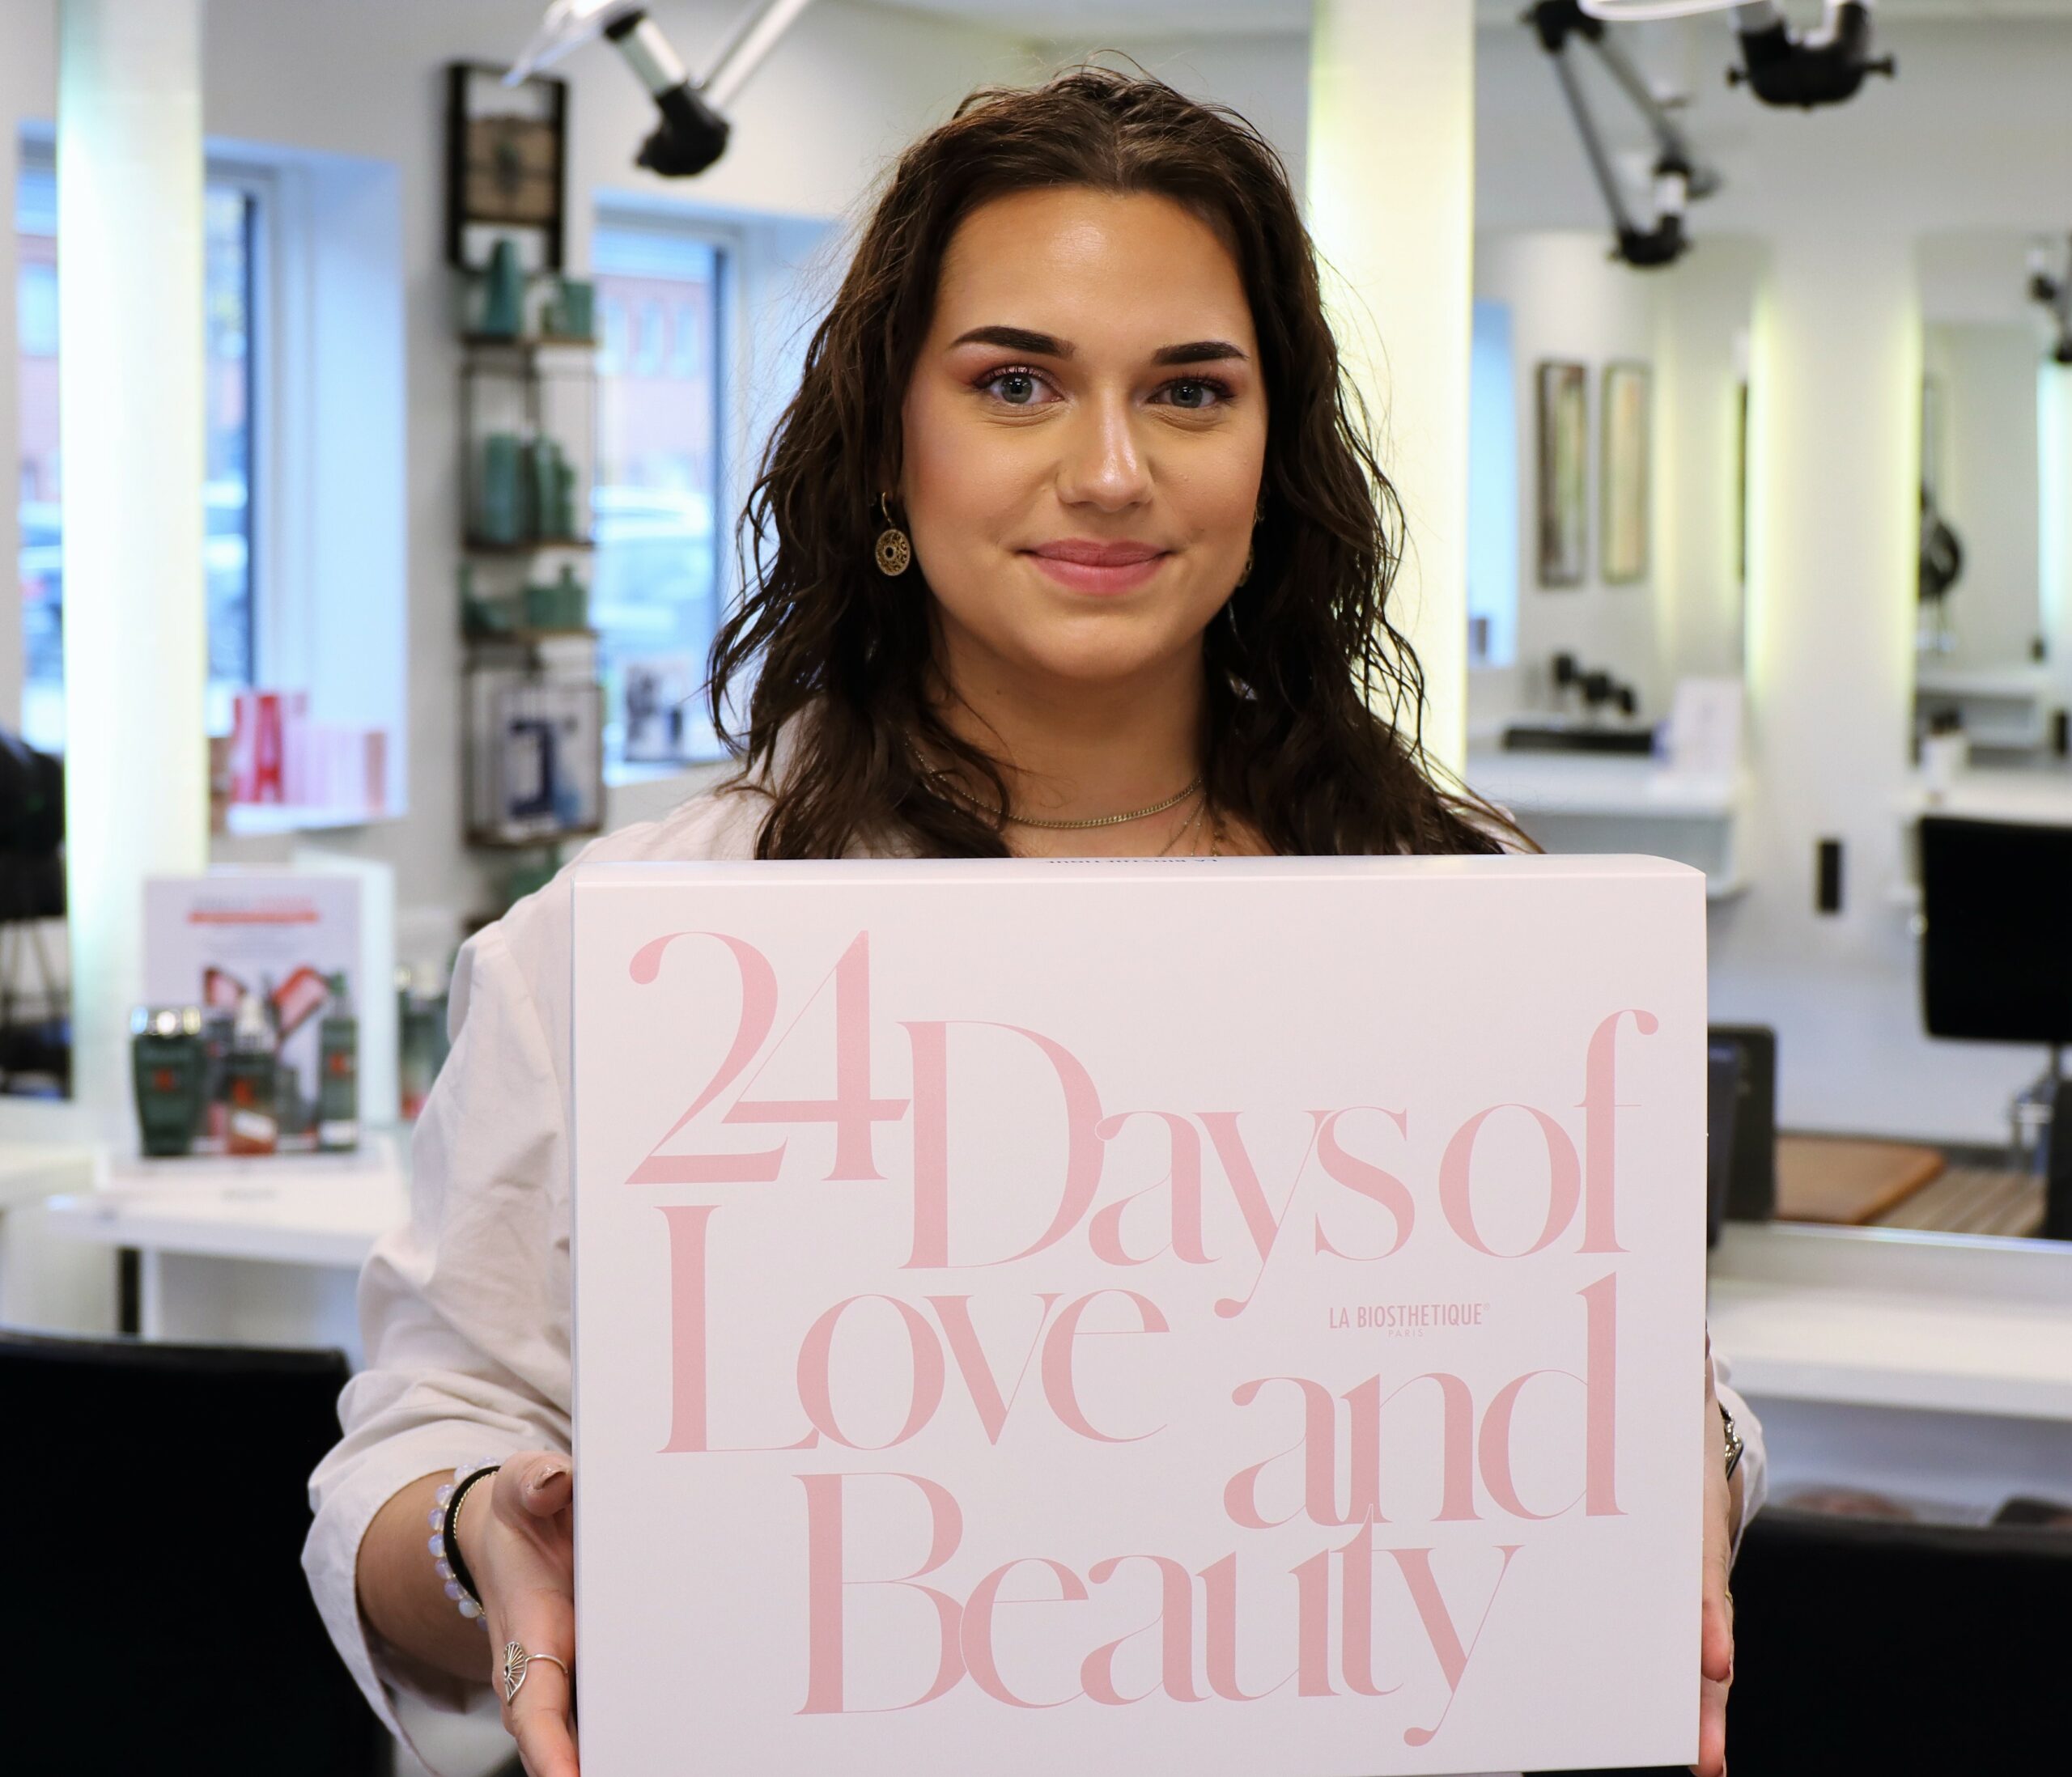 24 Days of Love and Beauty